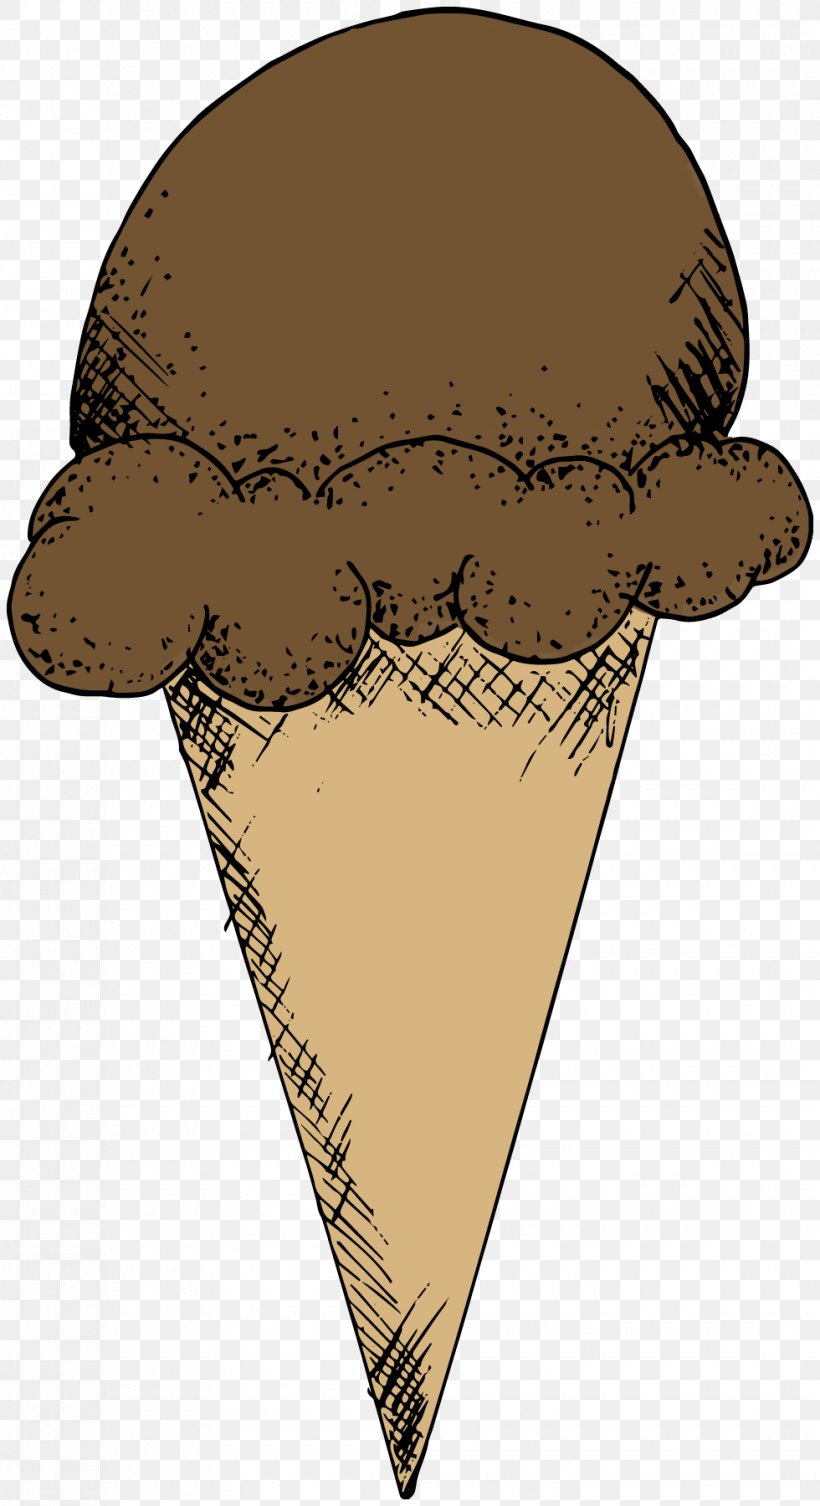 Ice Cream Cones Animated Cartoon, PNG, 980x1800px, Ice Cream Cones, Animated Cartoon, Cone, Food, Ice Cream Cone Download Free